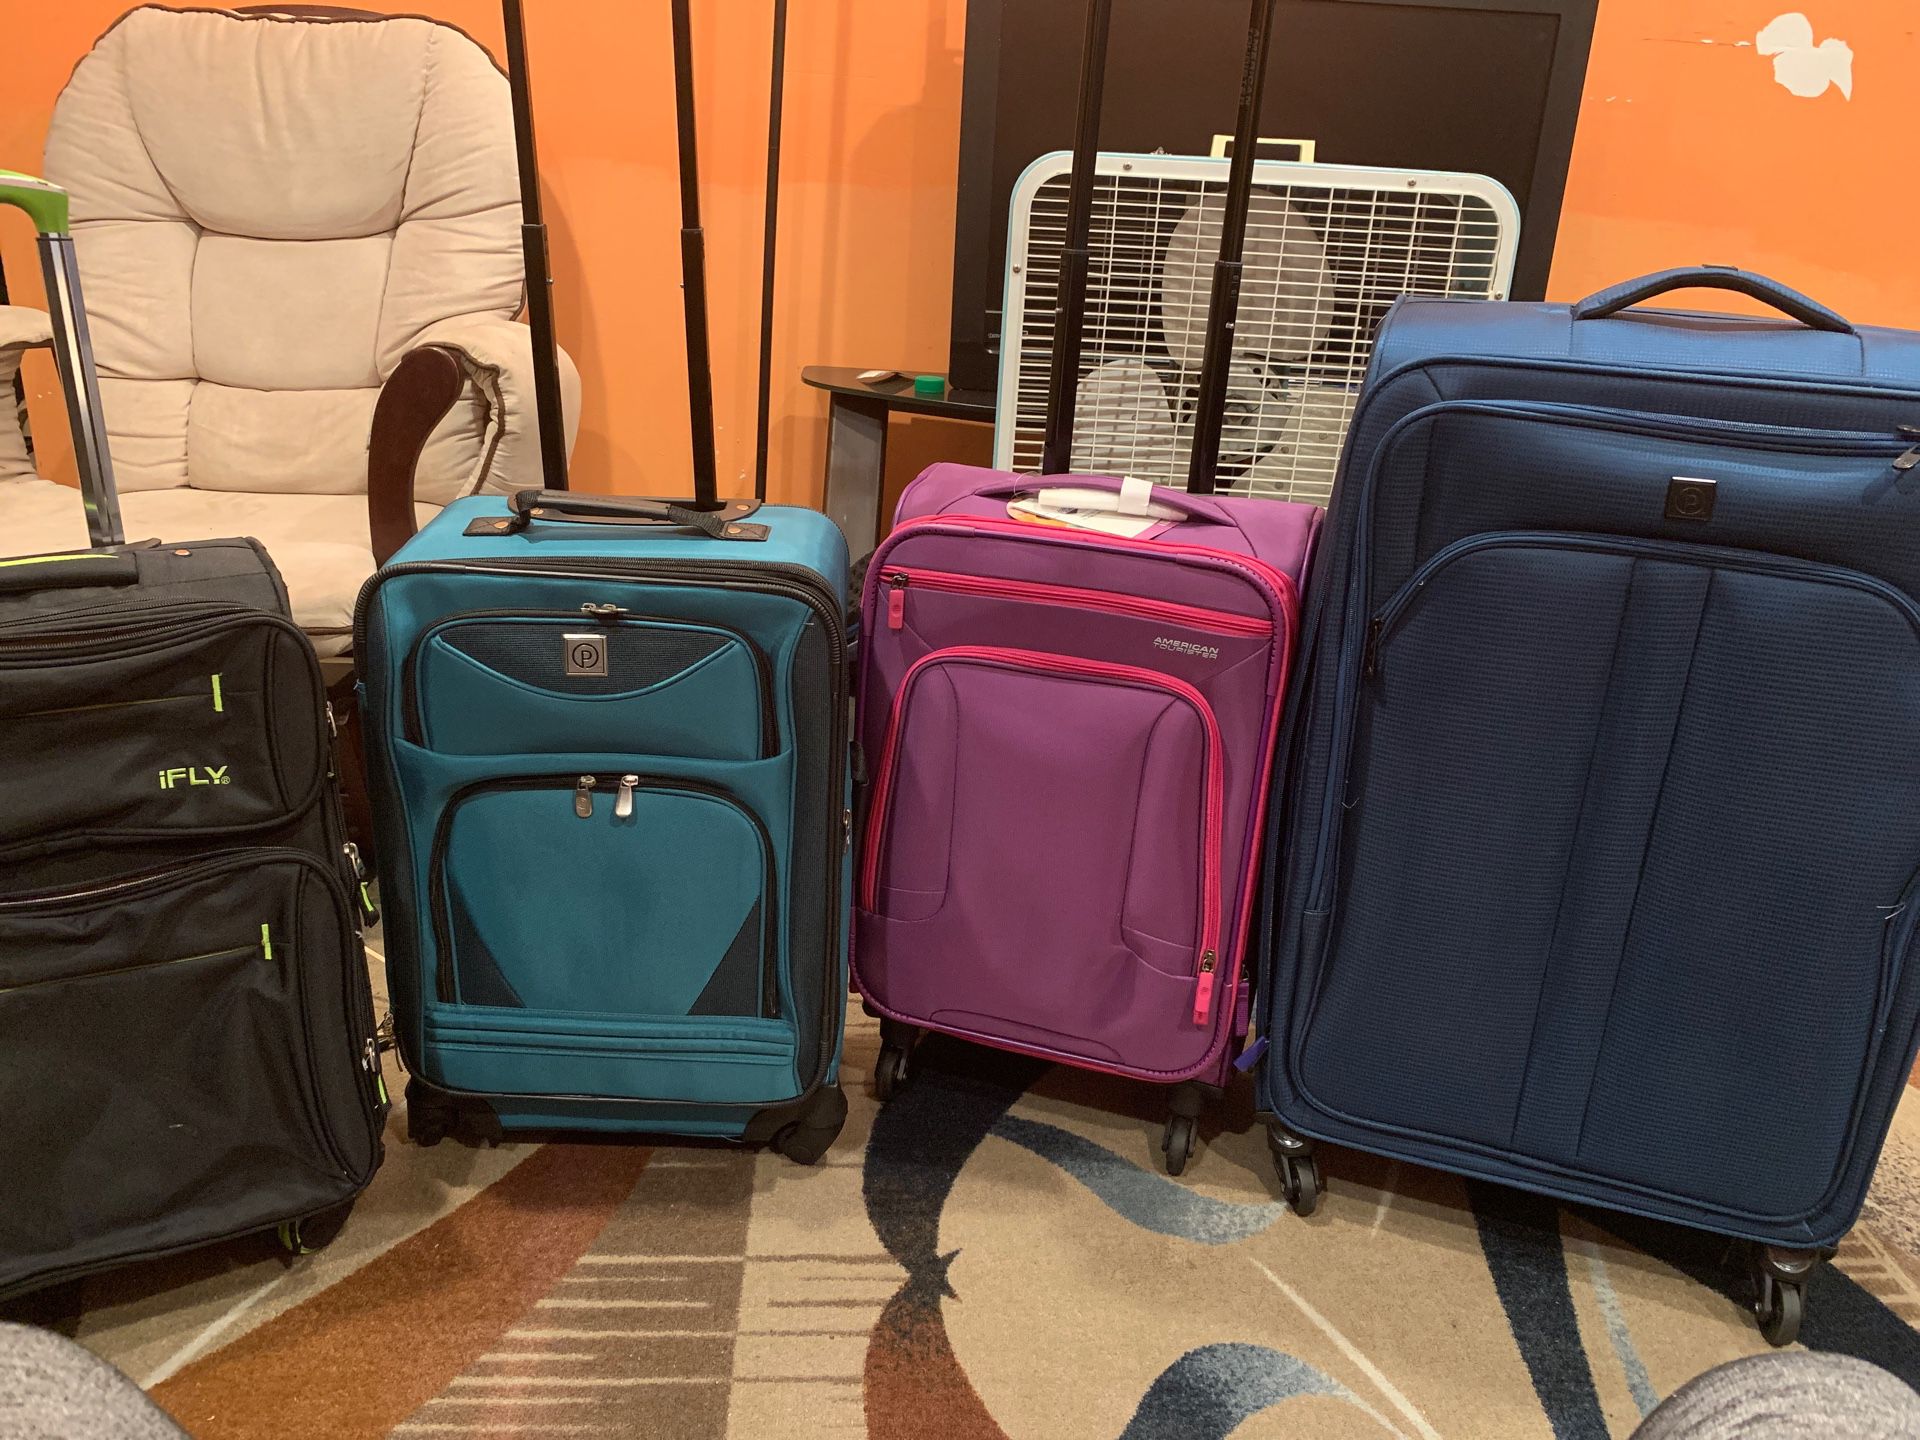 Traveling bags